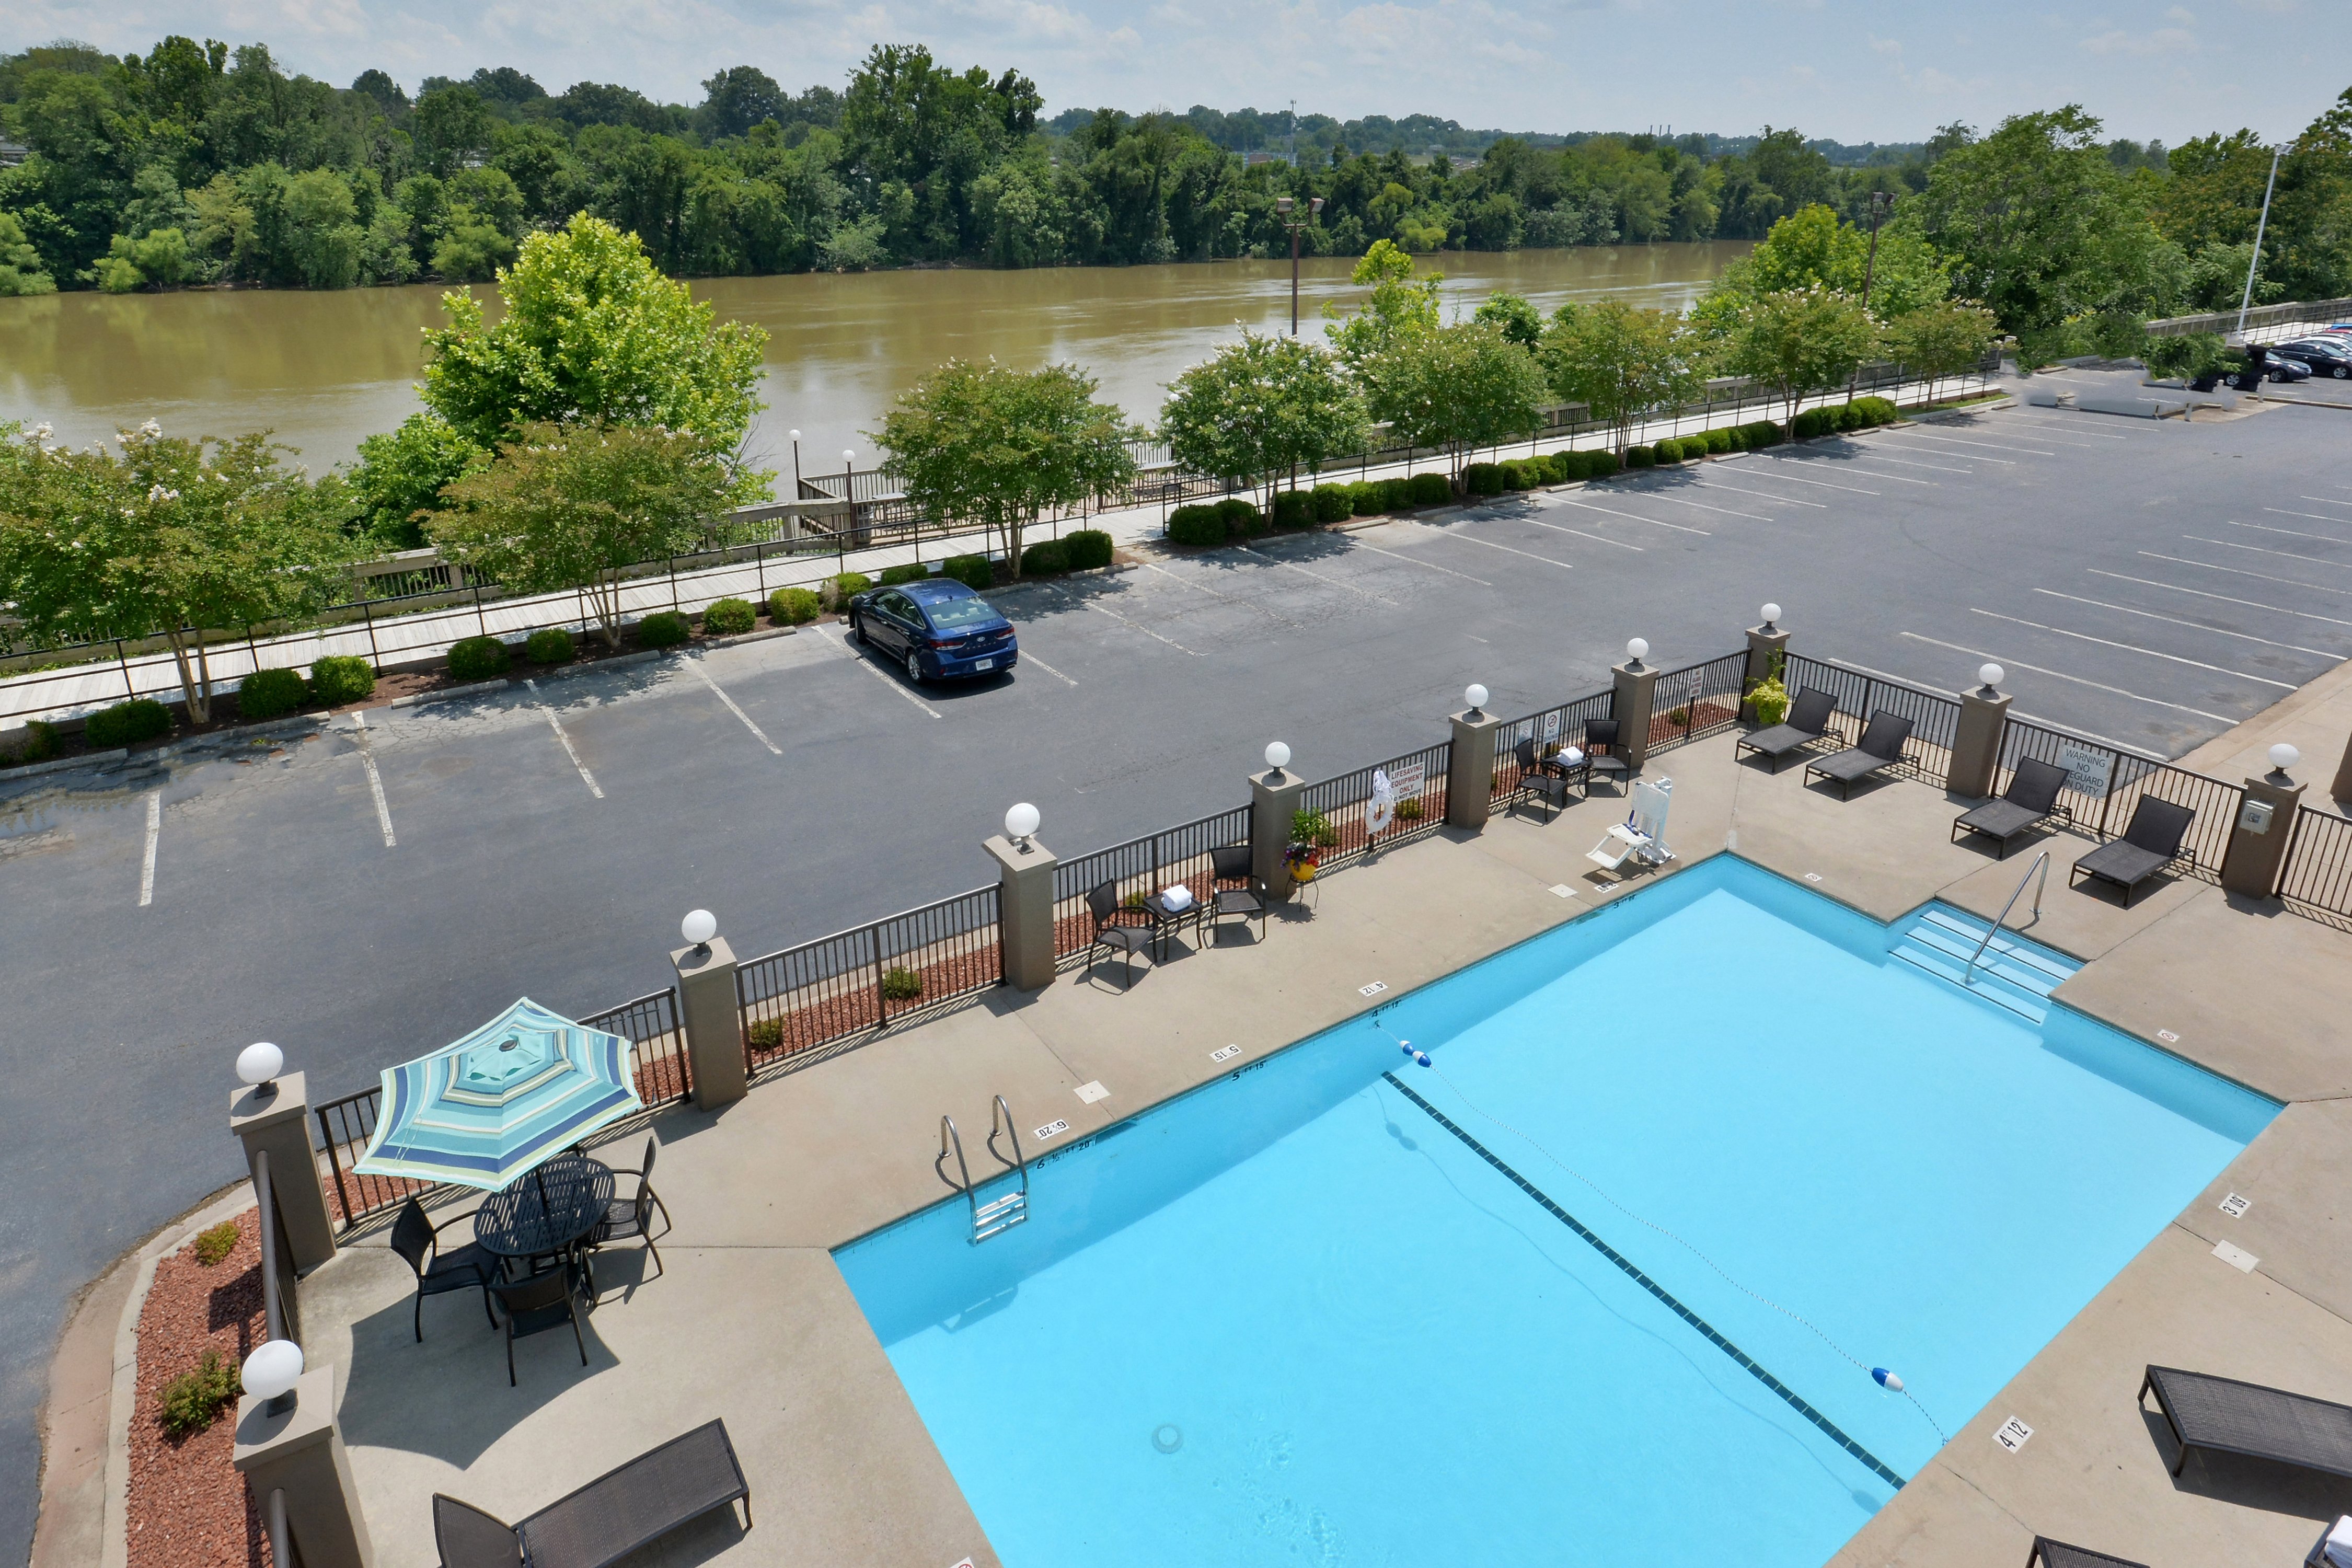 Guests can swim or take a walk along the River Walk Trail.